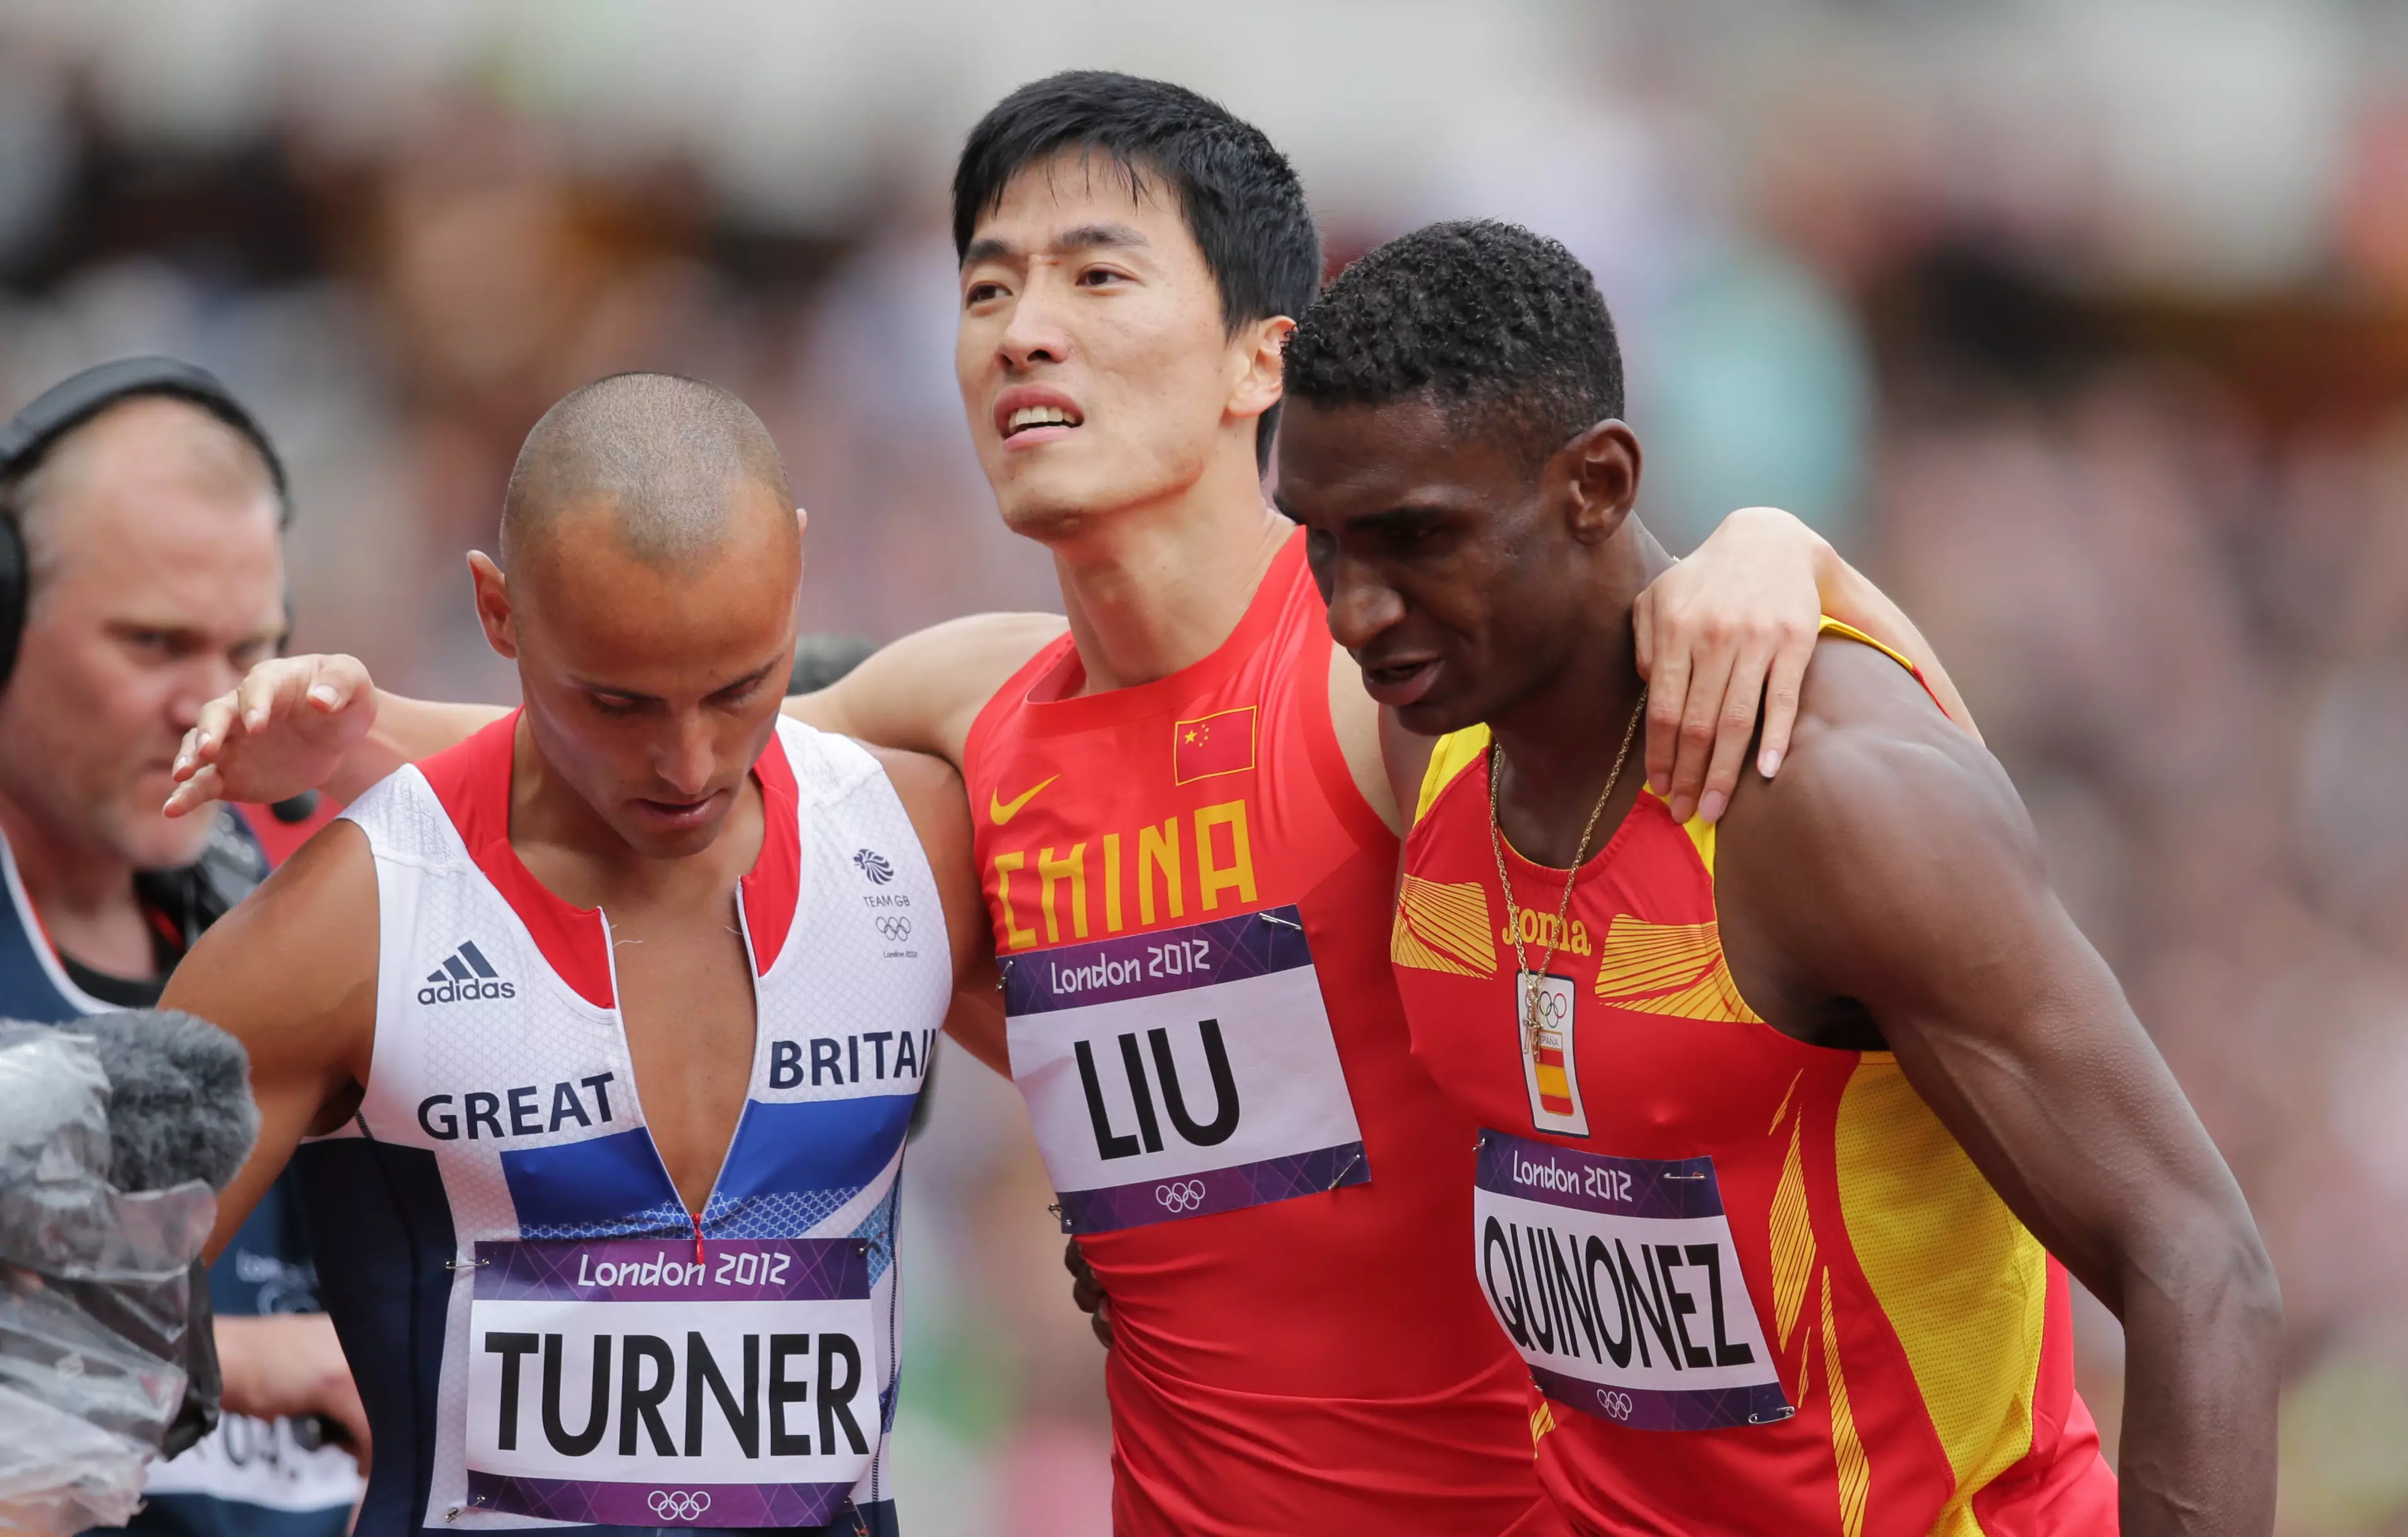 Xiang Liu was escorted from the track by his rival competitors.